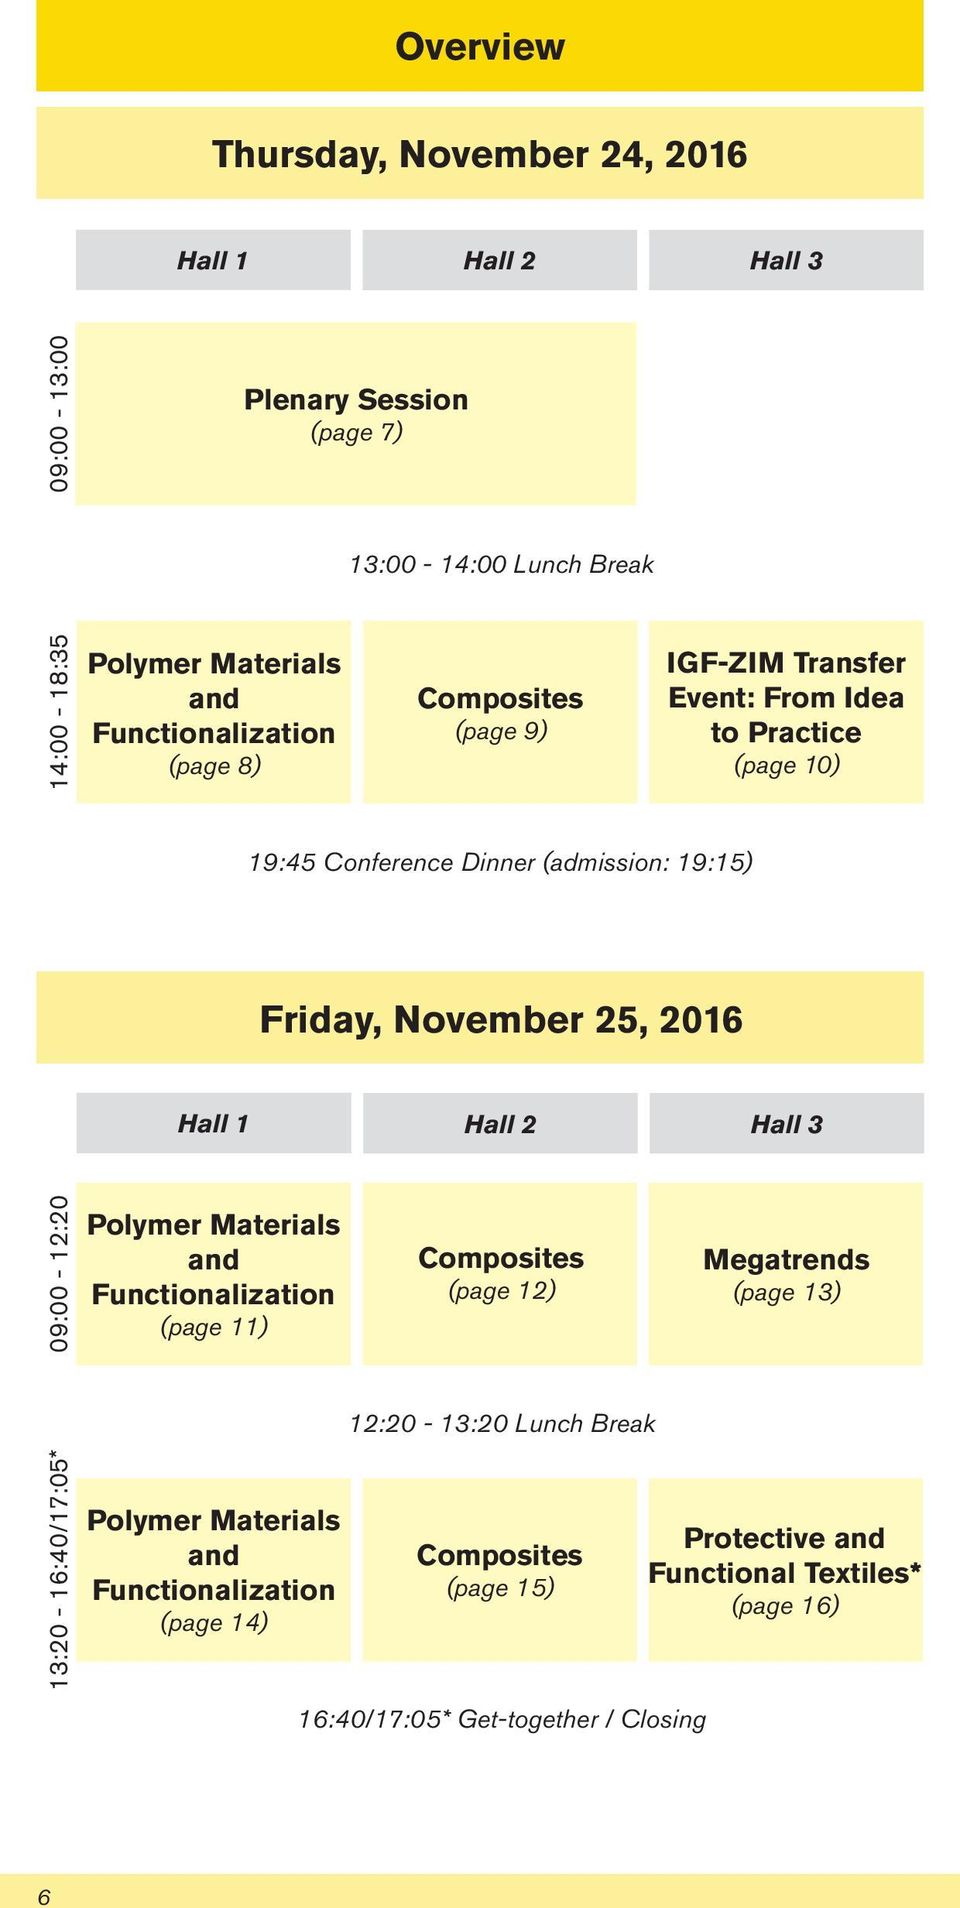 November 5, 06 Hall Hall Hall 3 09:00 - :0 Polymer Materials and Functionalization (page ) Composites (page ) Megatrends (page 3) :0-3:0 Lunch Break